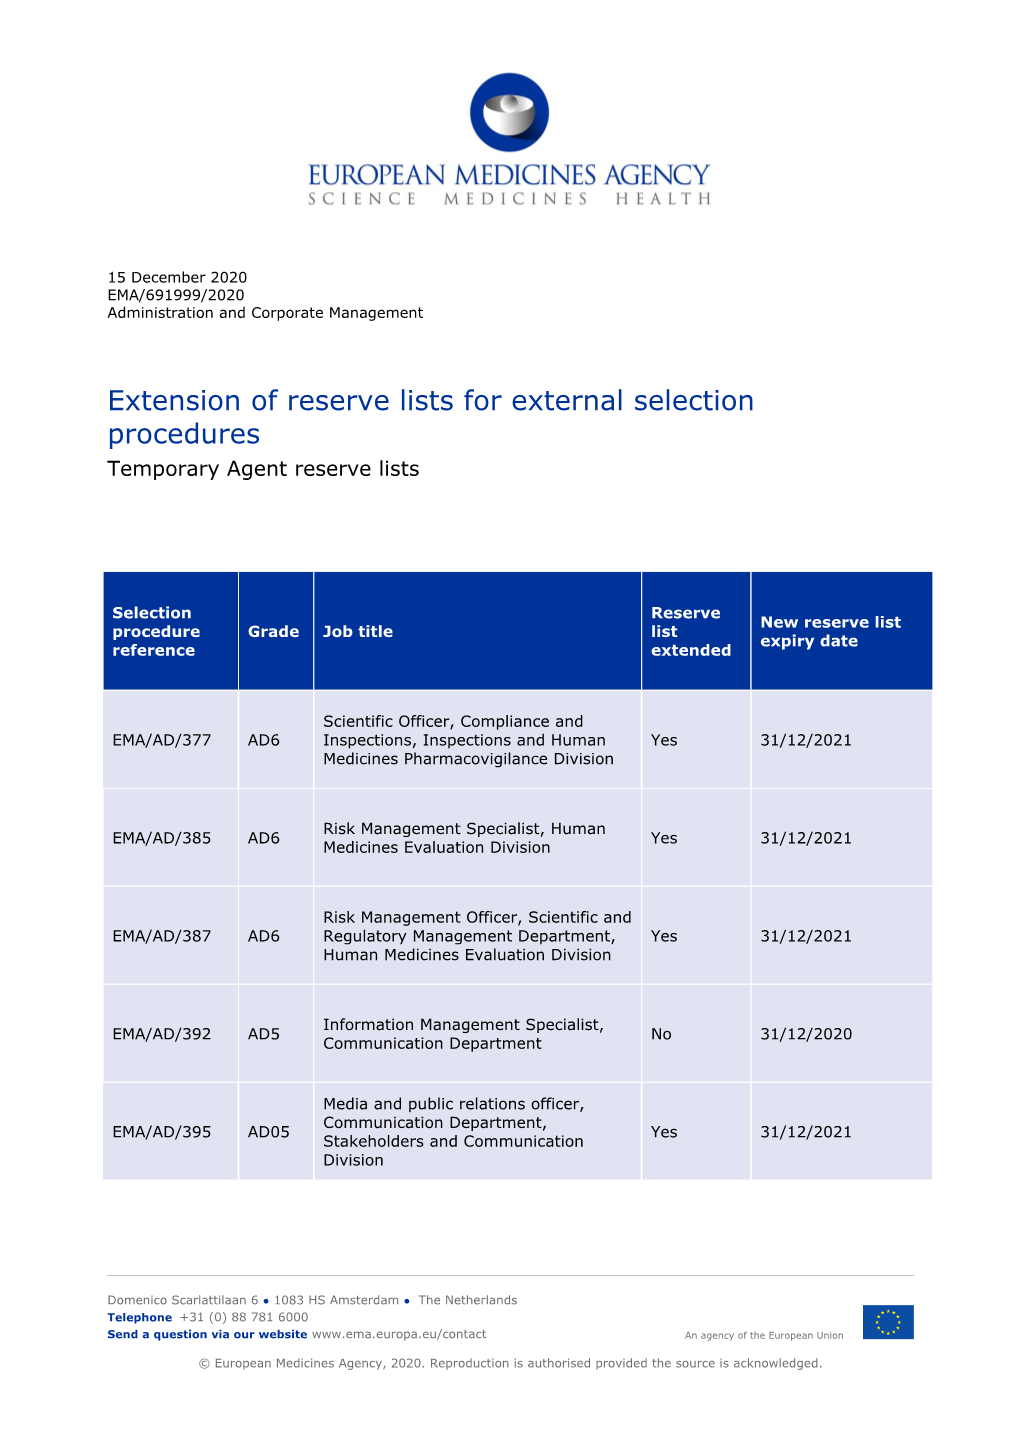 Extension of Reserve Lists for External Selection Procedures Temporary Agent Reserve Lists